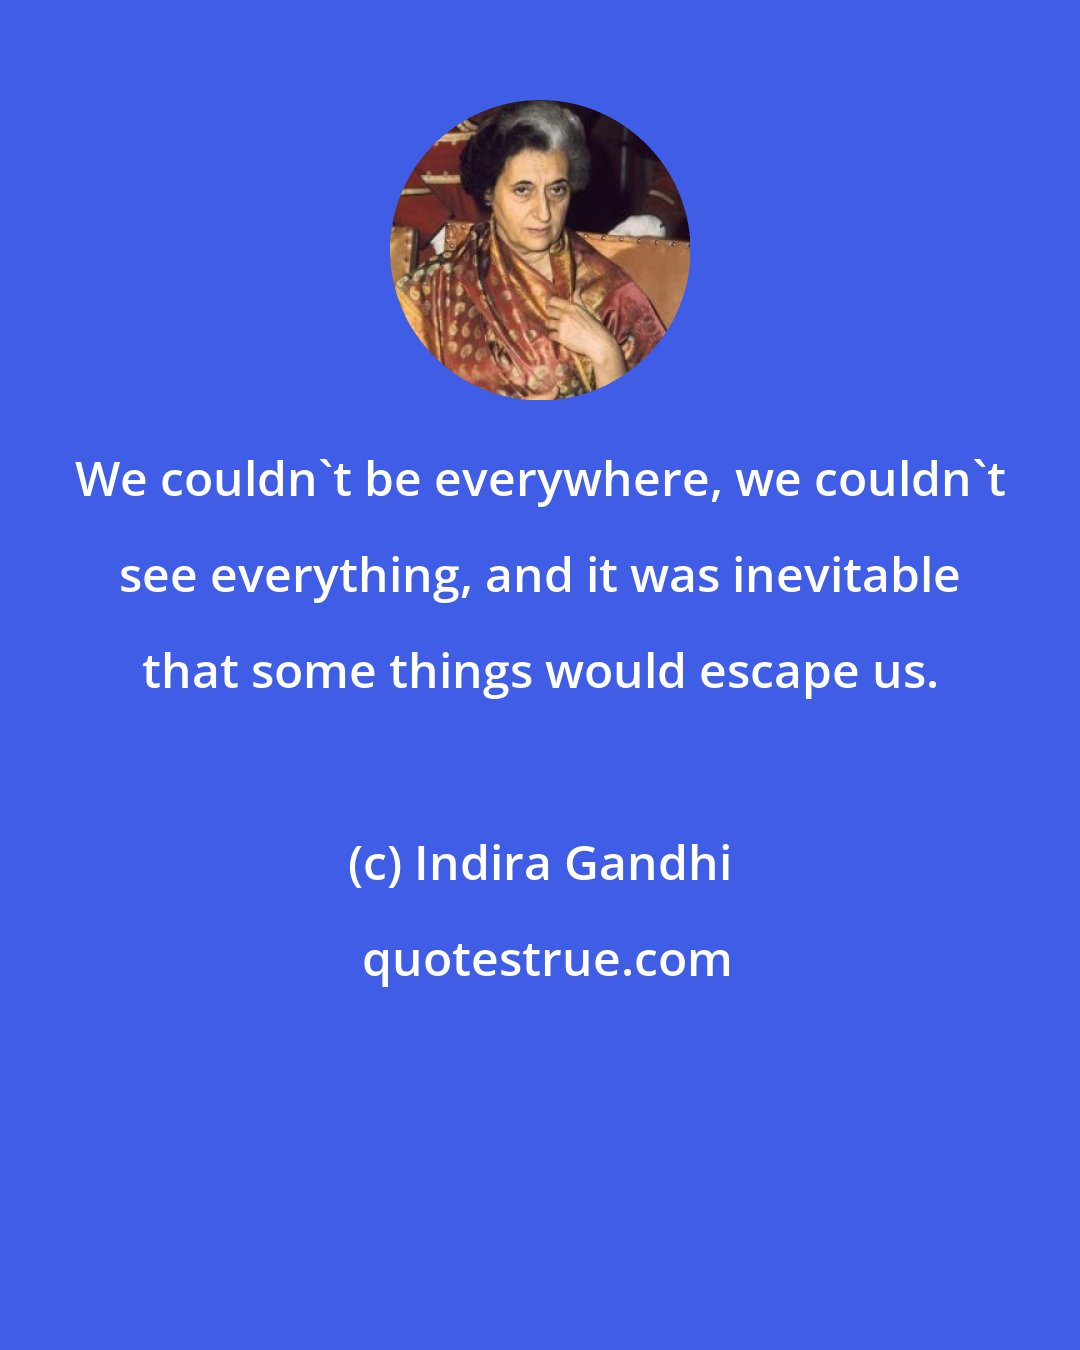 Indira Gandhi: We couldn't be everywhere, we couldn't see everything, and it was inevitable that some things would escape us.